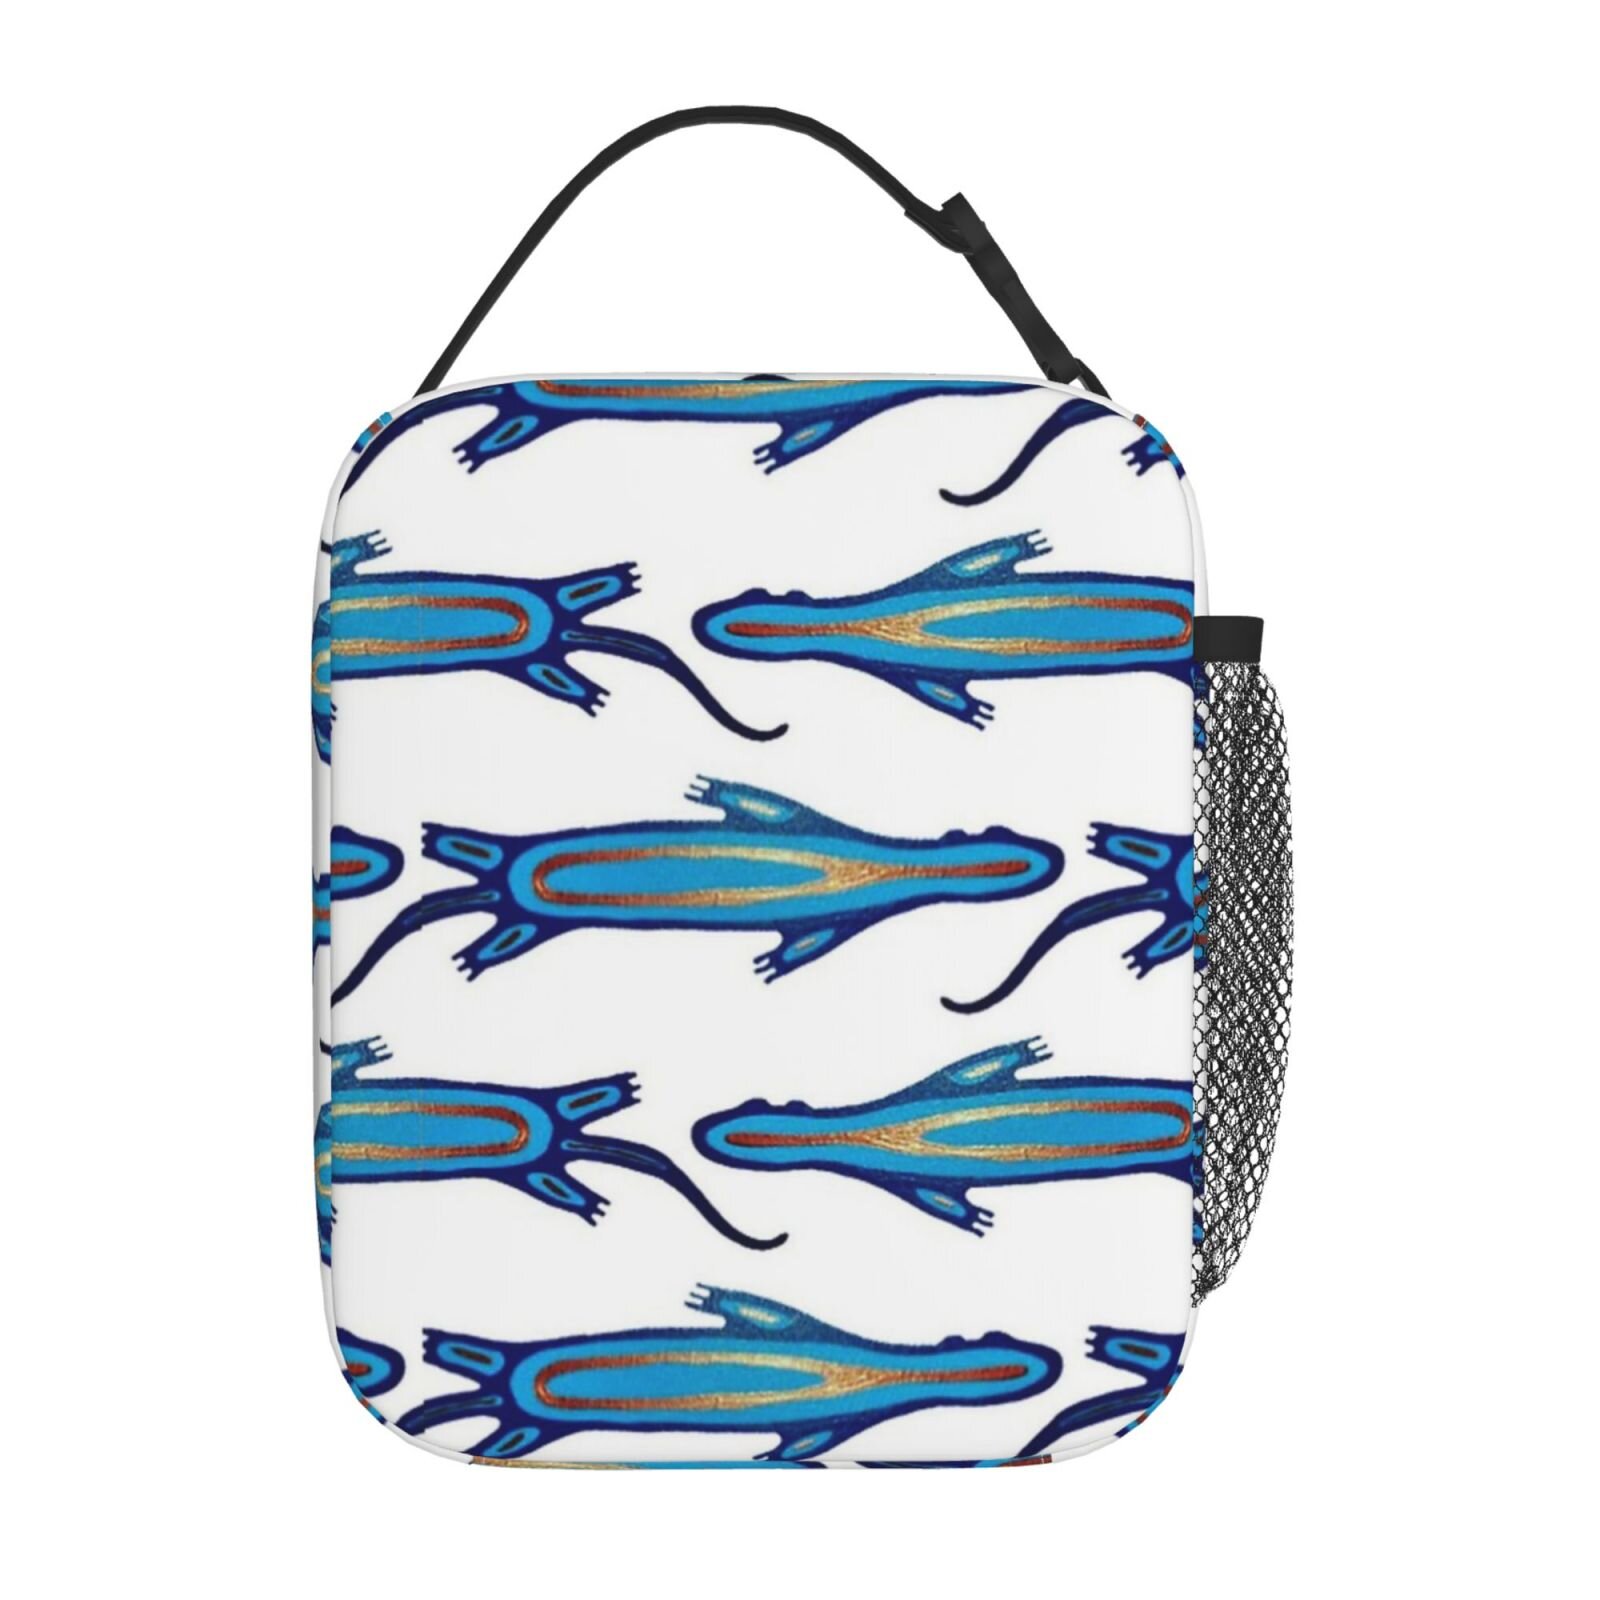 Lunch Bag Otter Tote Insulated Cooler Kids School Travel